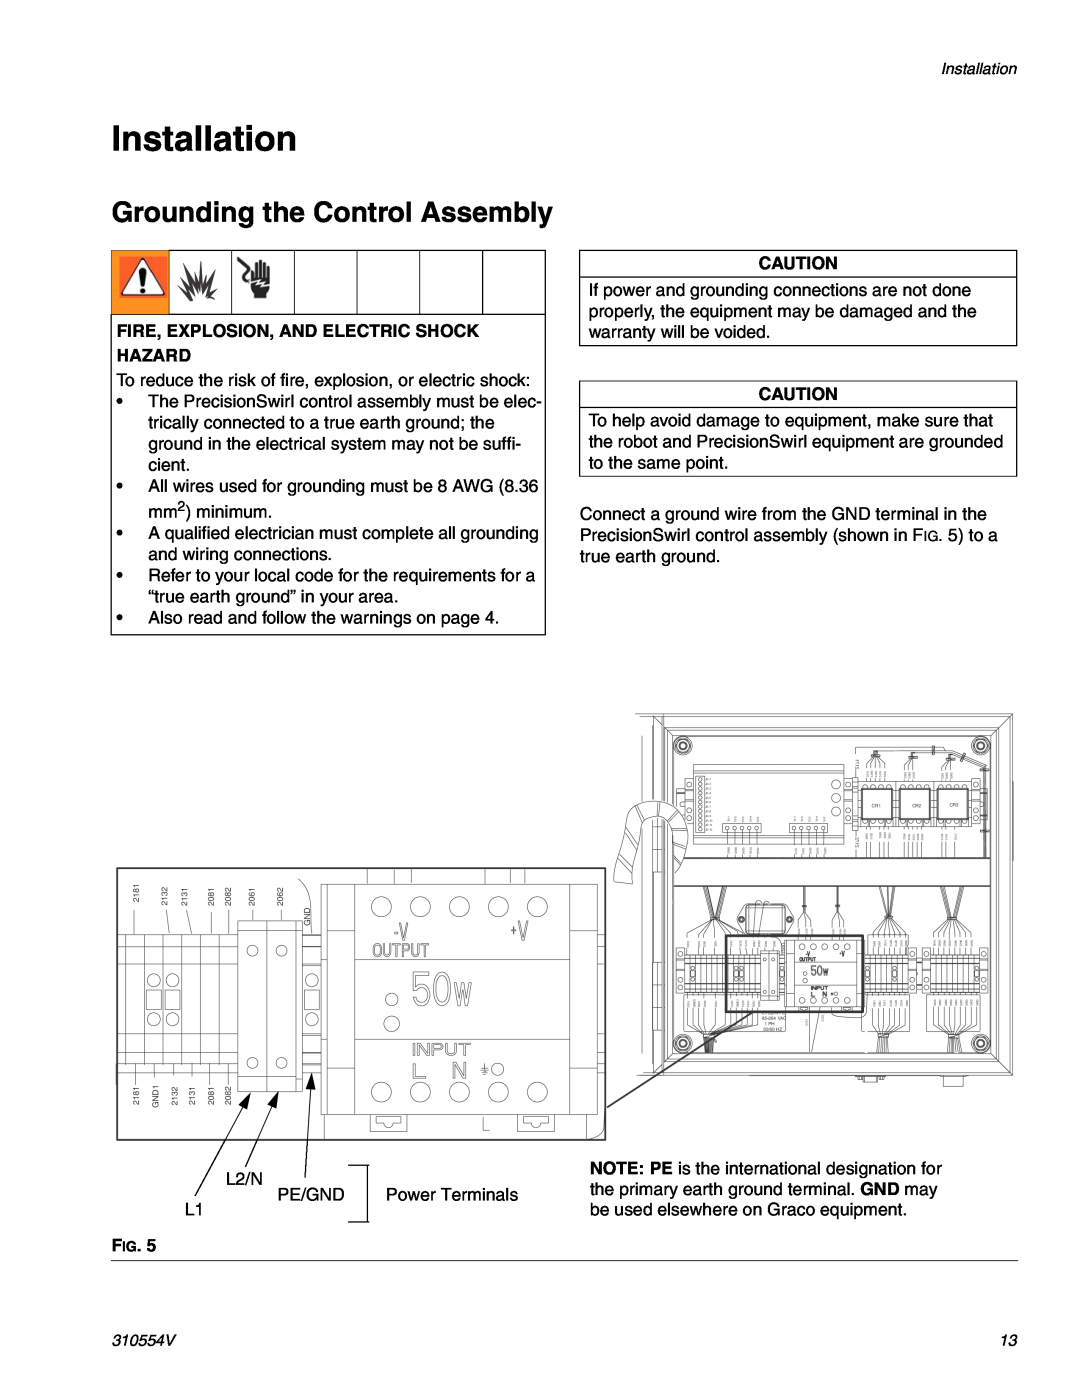 Graco 310554V important safety instructions Installation, Grounding the Control Assembly 